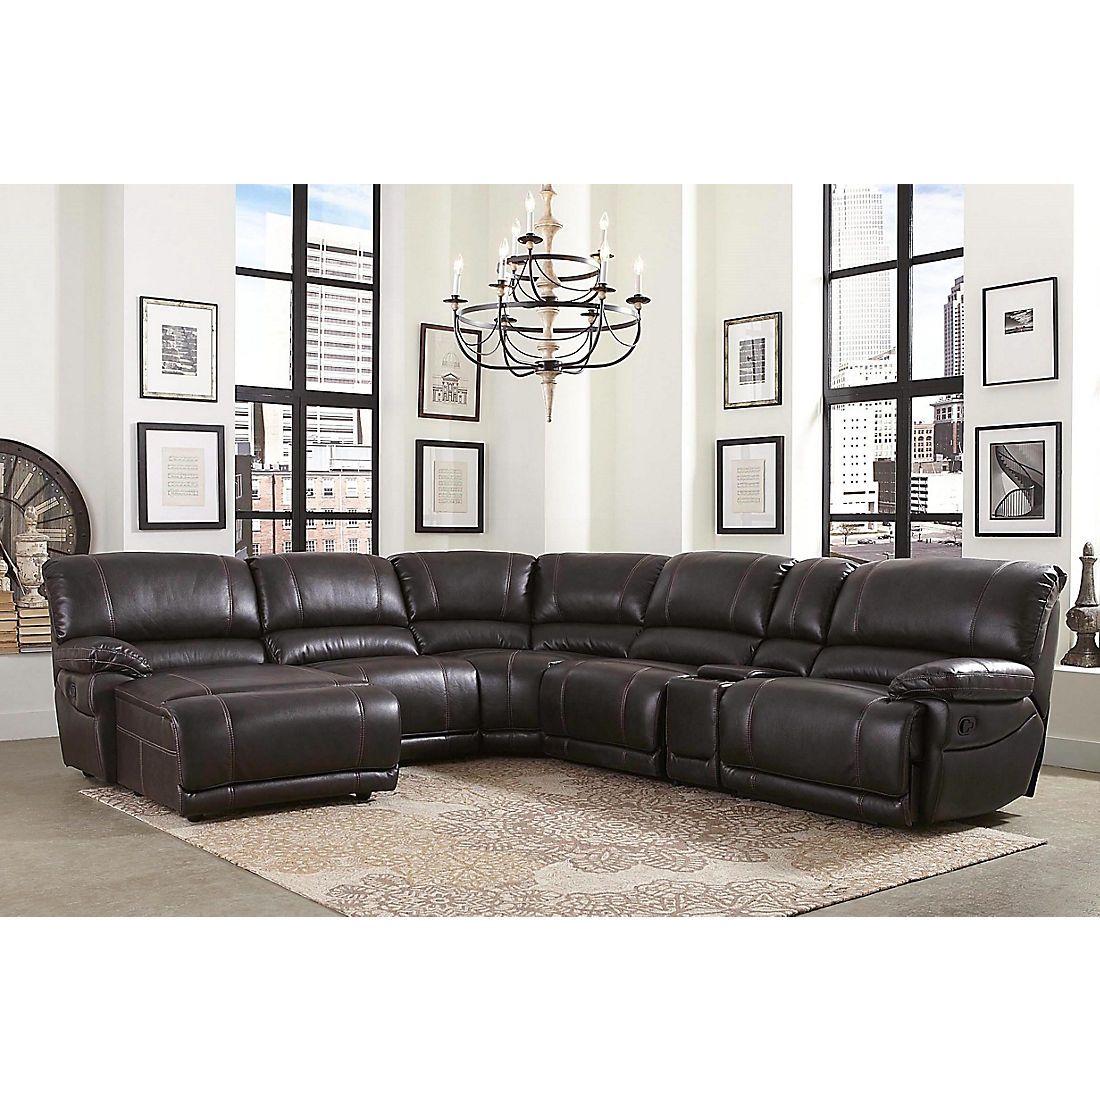 Abbyson Living Jameson 6 Pc Leather, Abbyson Living Leather Sectional